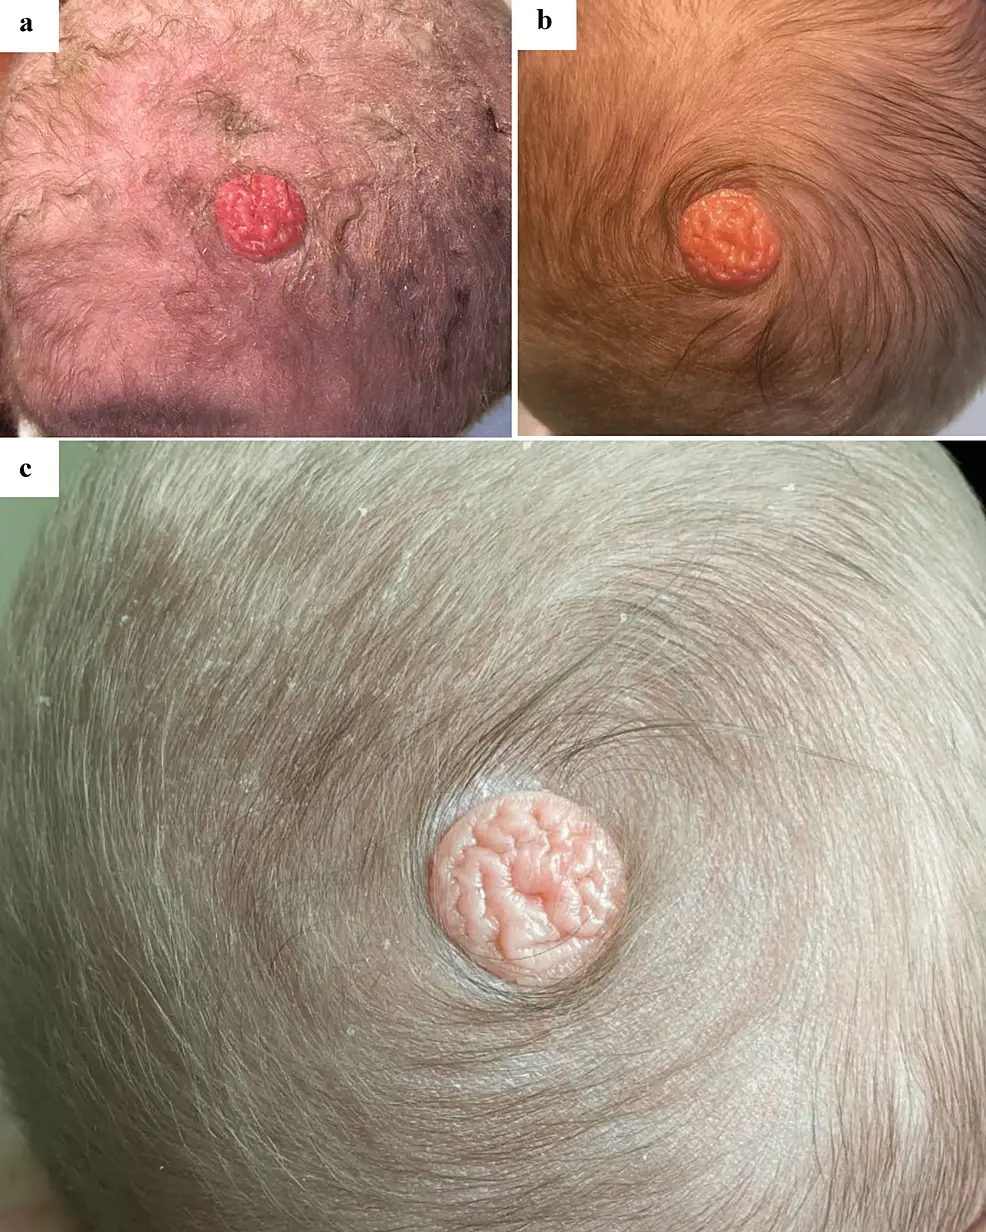 Cureus | Nevus Sebaceus Arising Within a Scalp Whorl of a Healthy Male  Neonate | Article